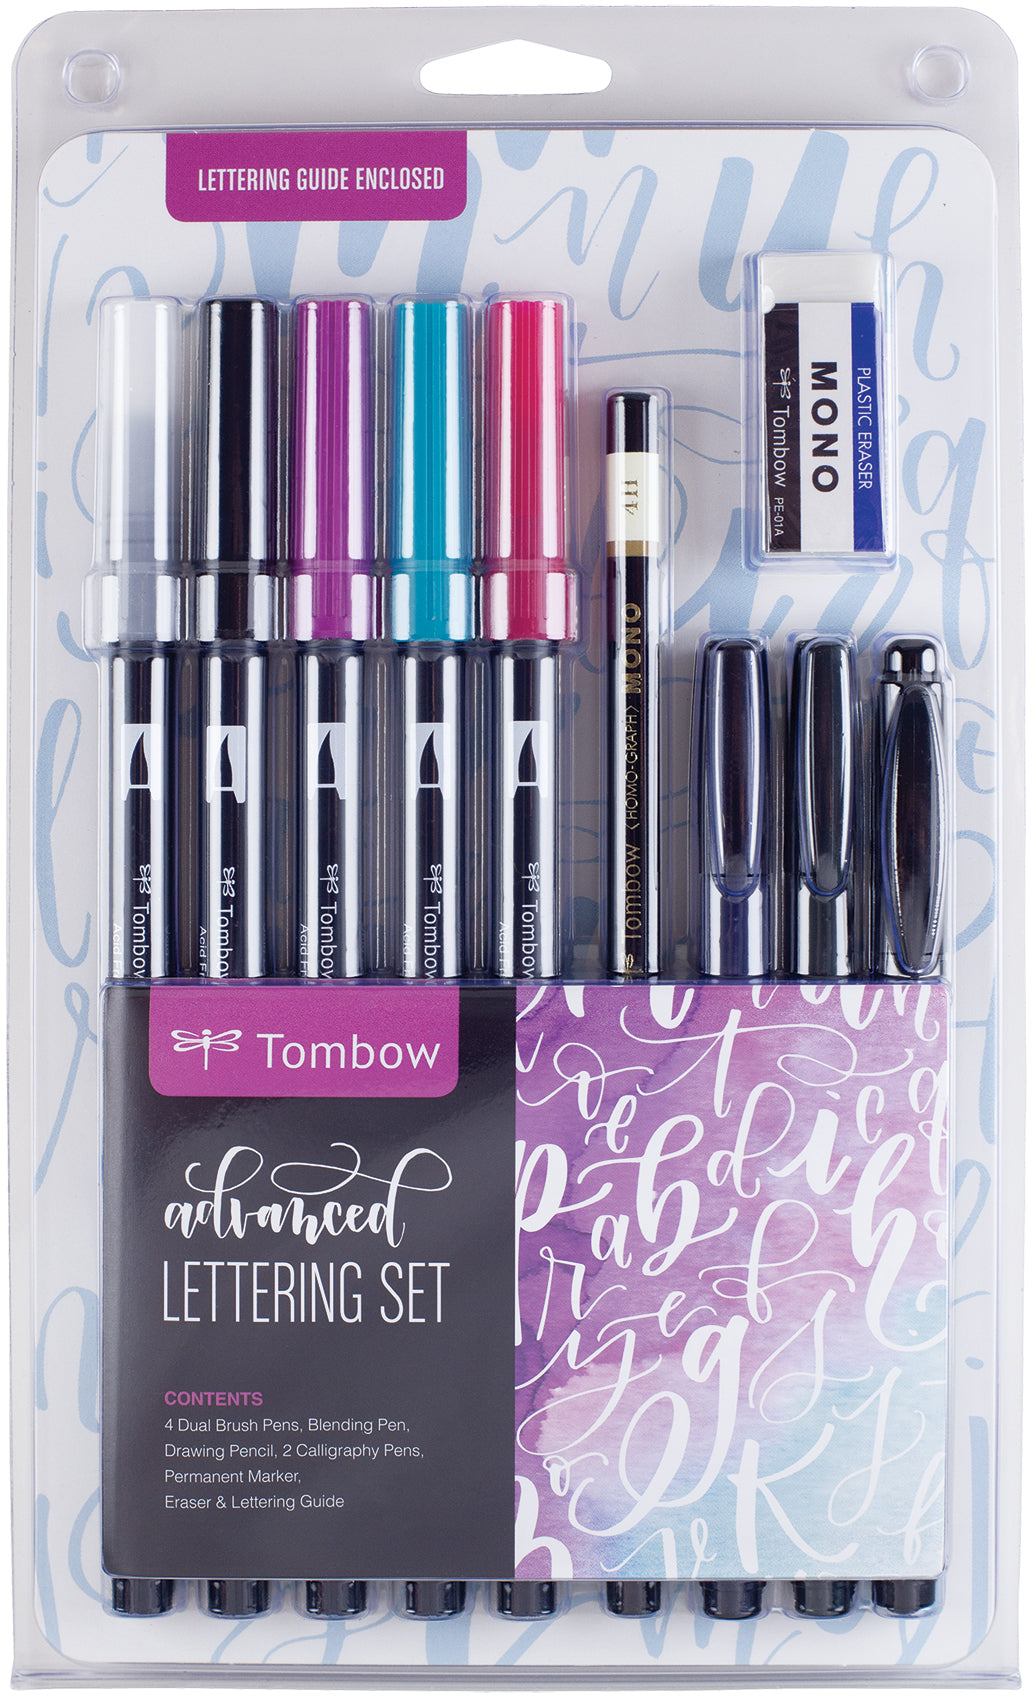 TOMBOW - Advanced Lettering Set